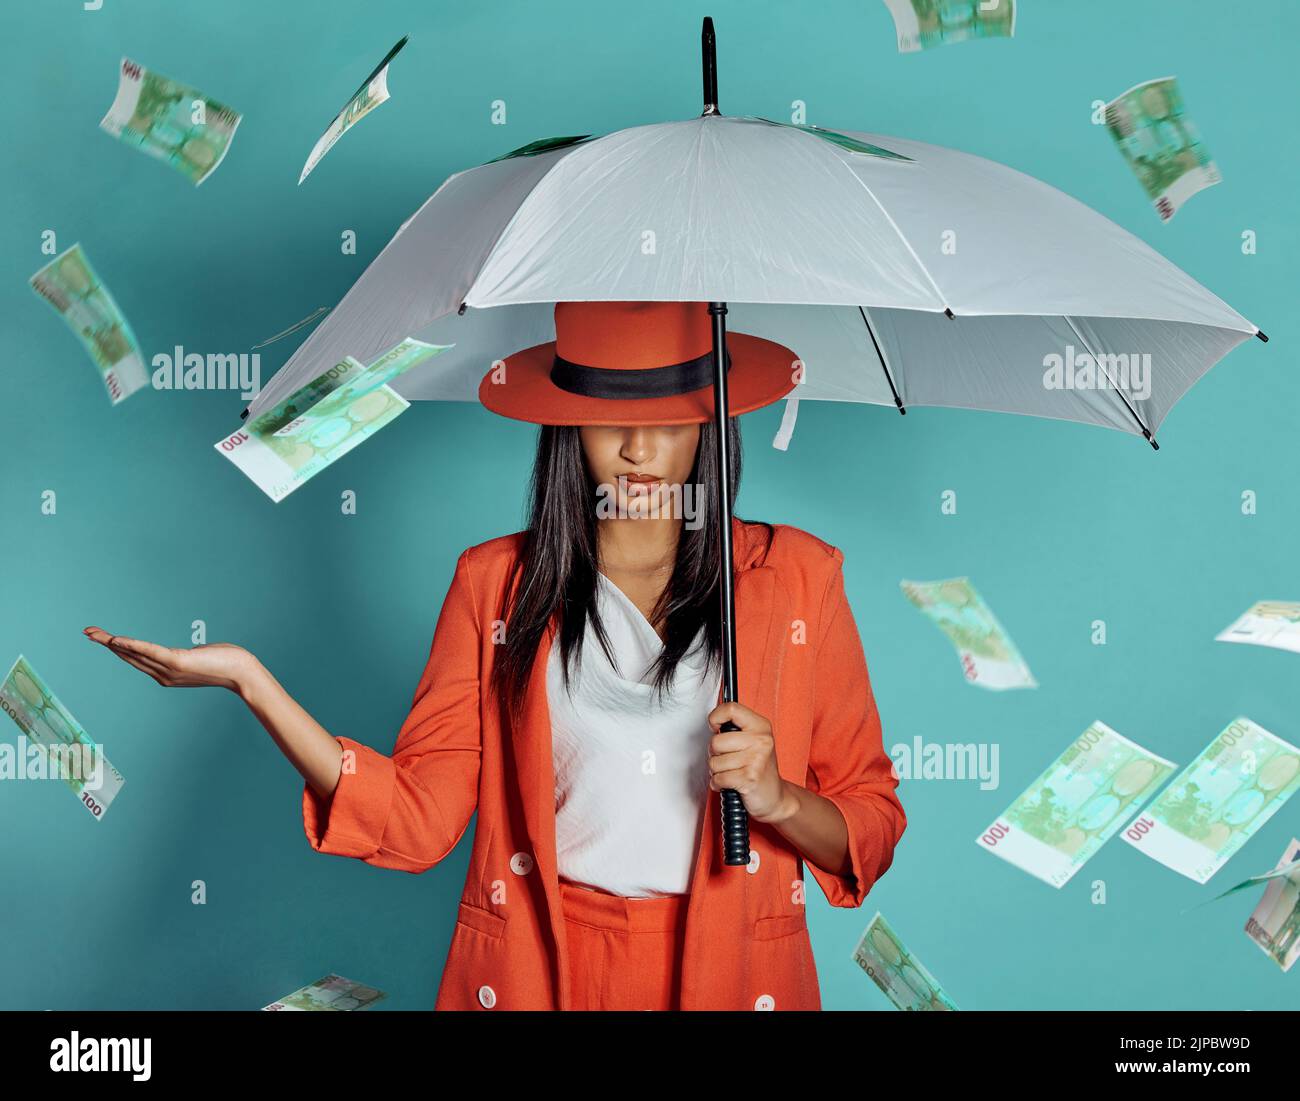 Money, fashion and rich lady being showered by cash while holding umbrella for insurance, protection and cover showing her wealth after payout Stock Photo